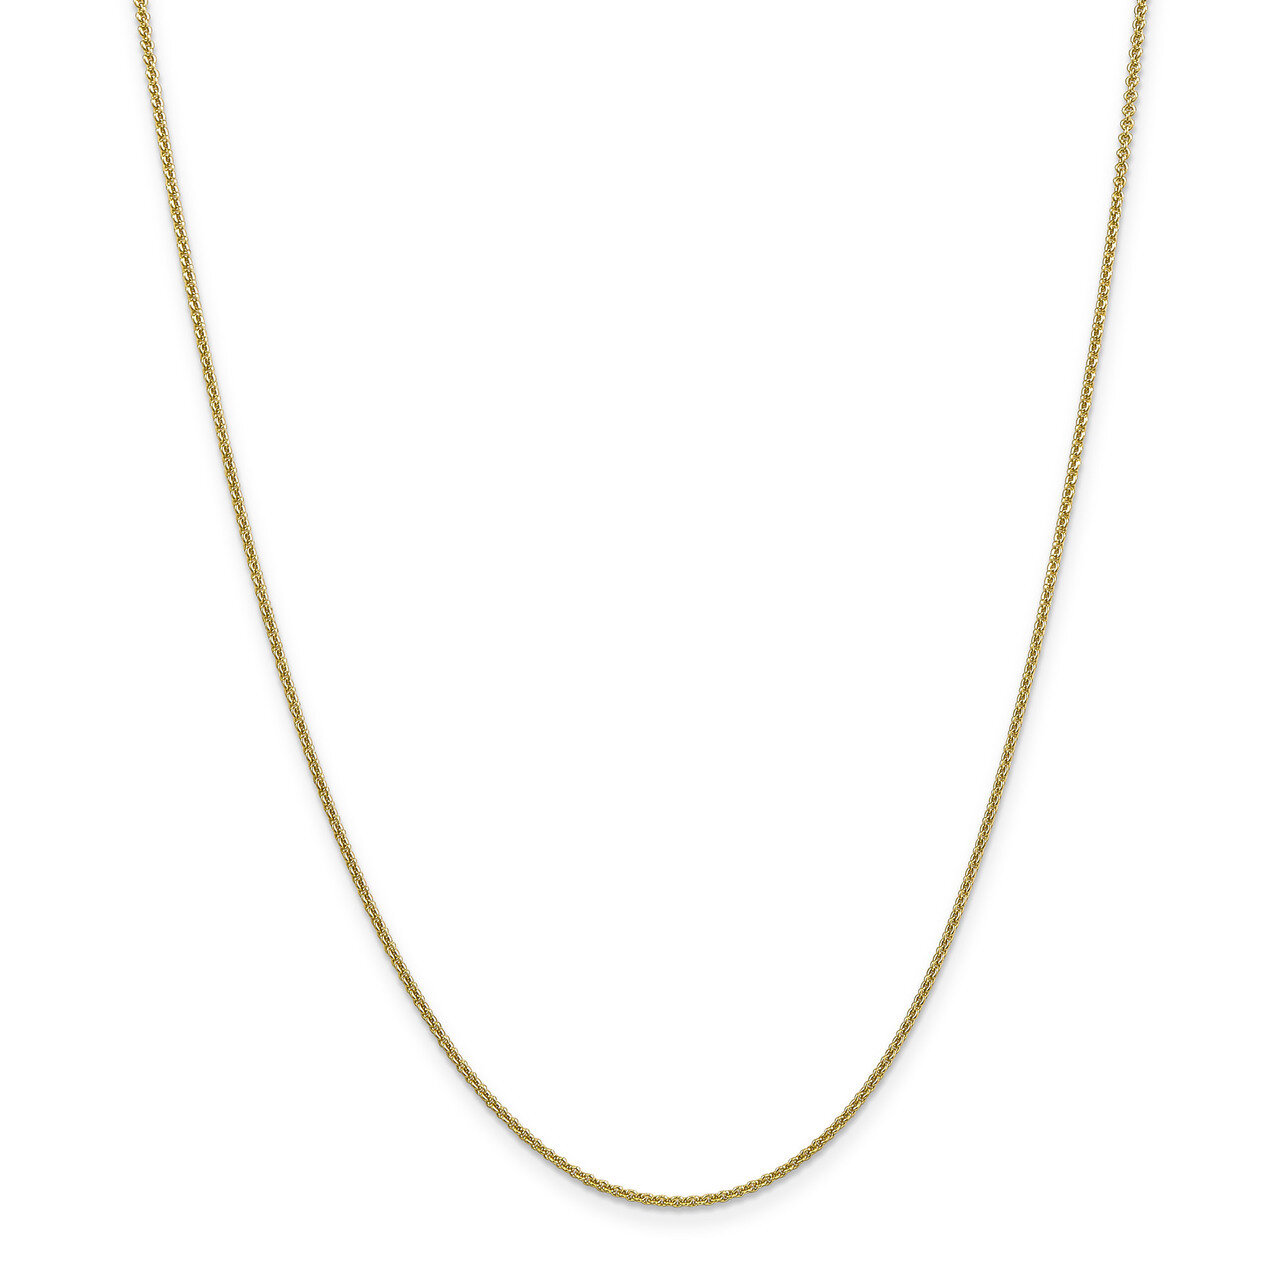 24 Inch 1.5mm Cable Chain 10k Gold 10PE54-24